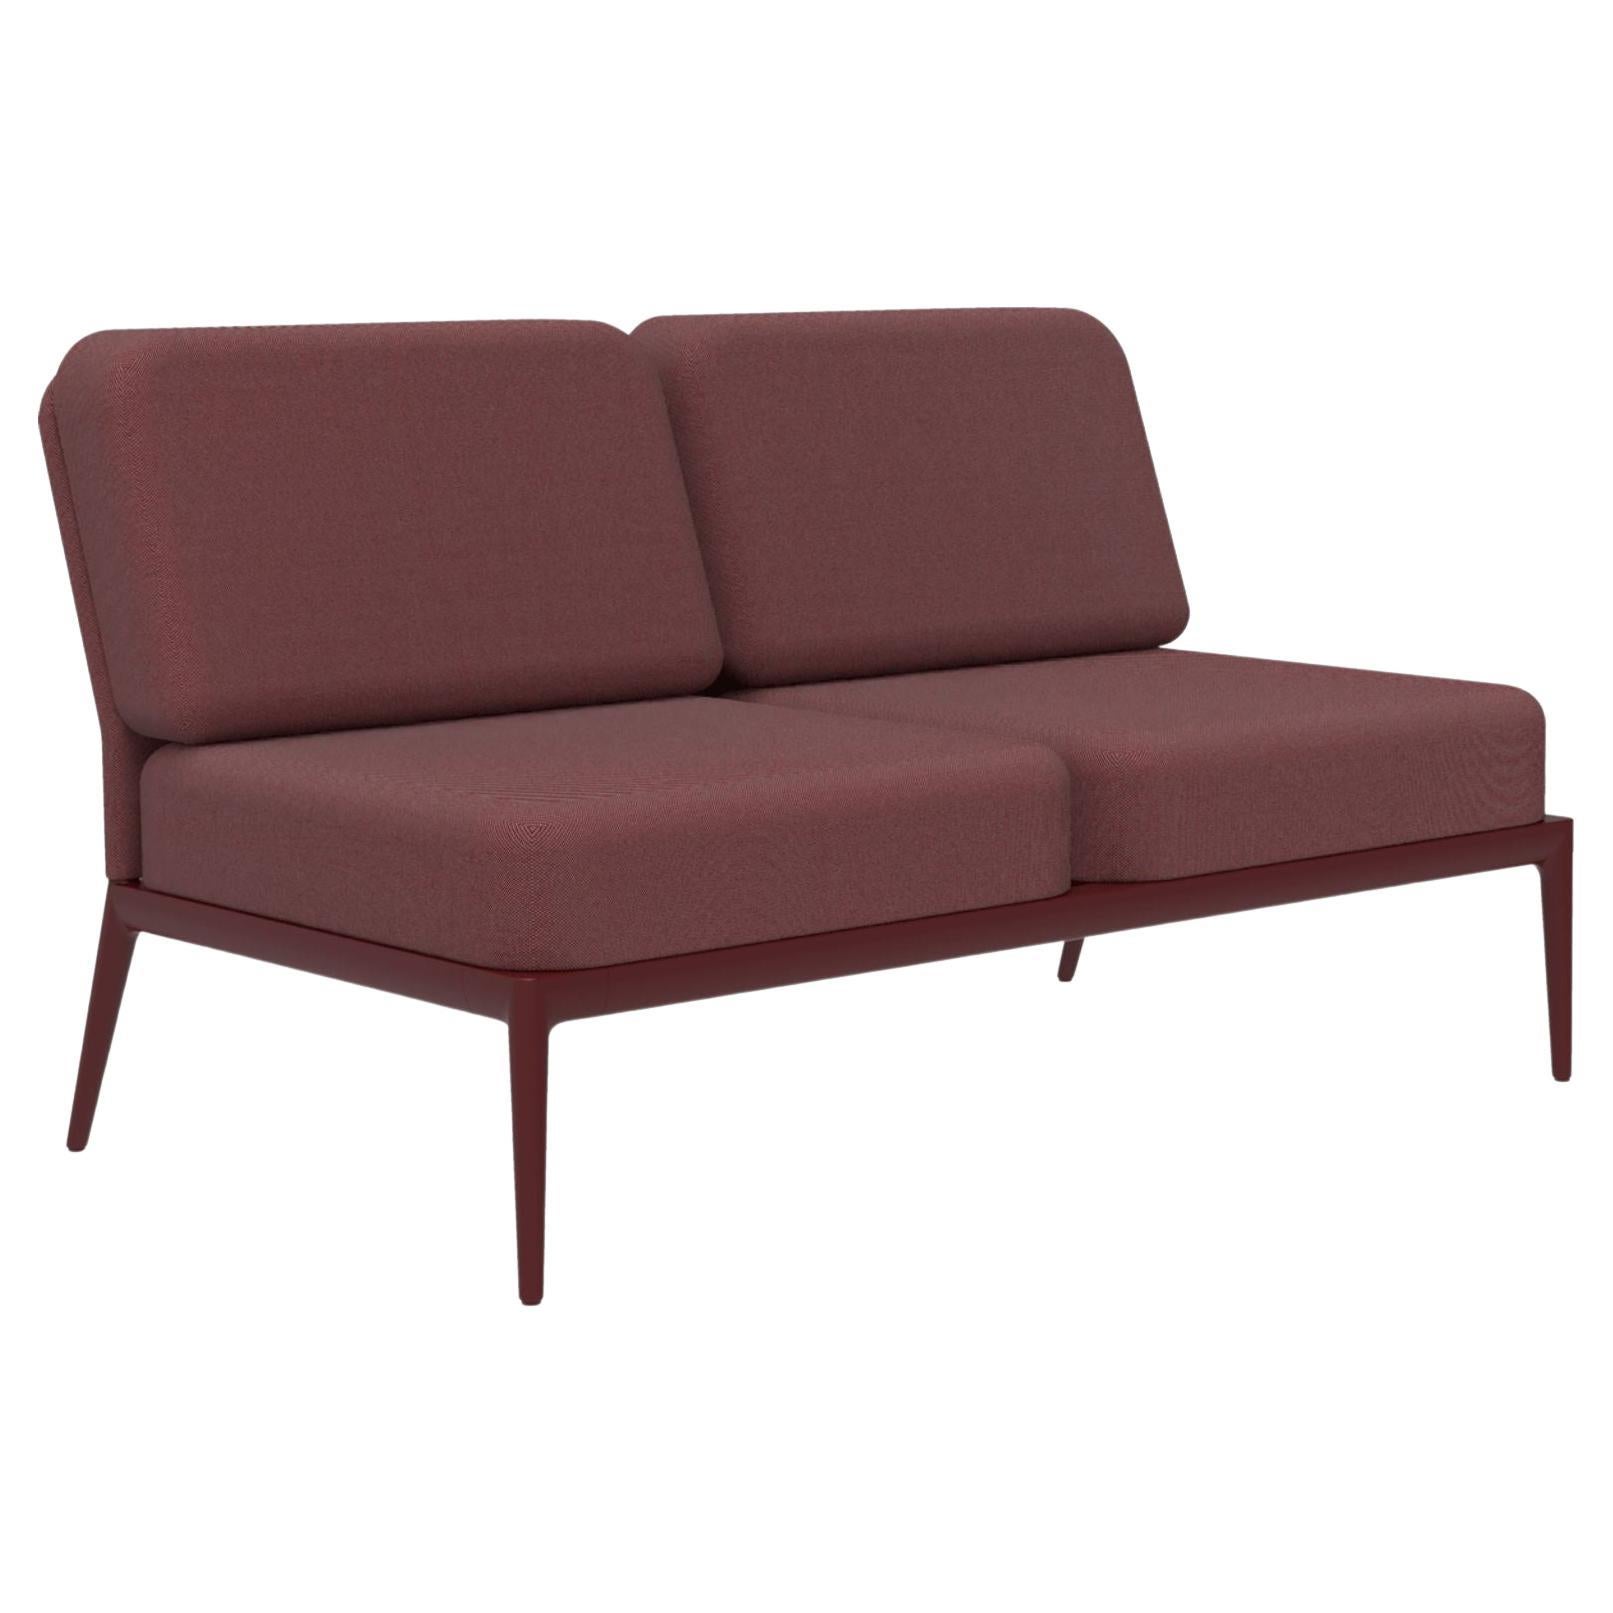 Cover Burgundy Double Central Modular Sofa by Mowee For Sale